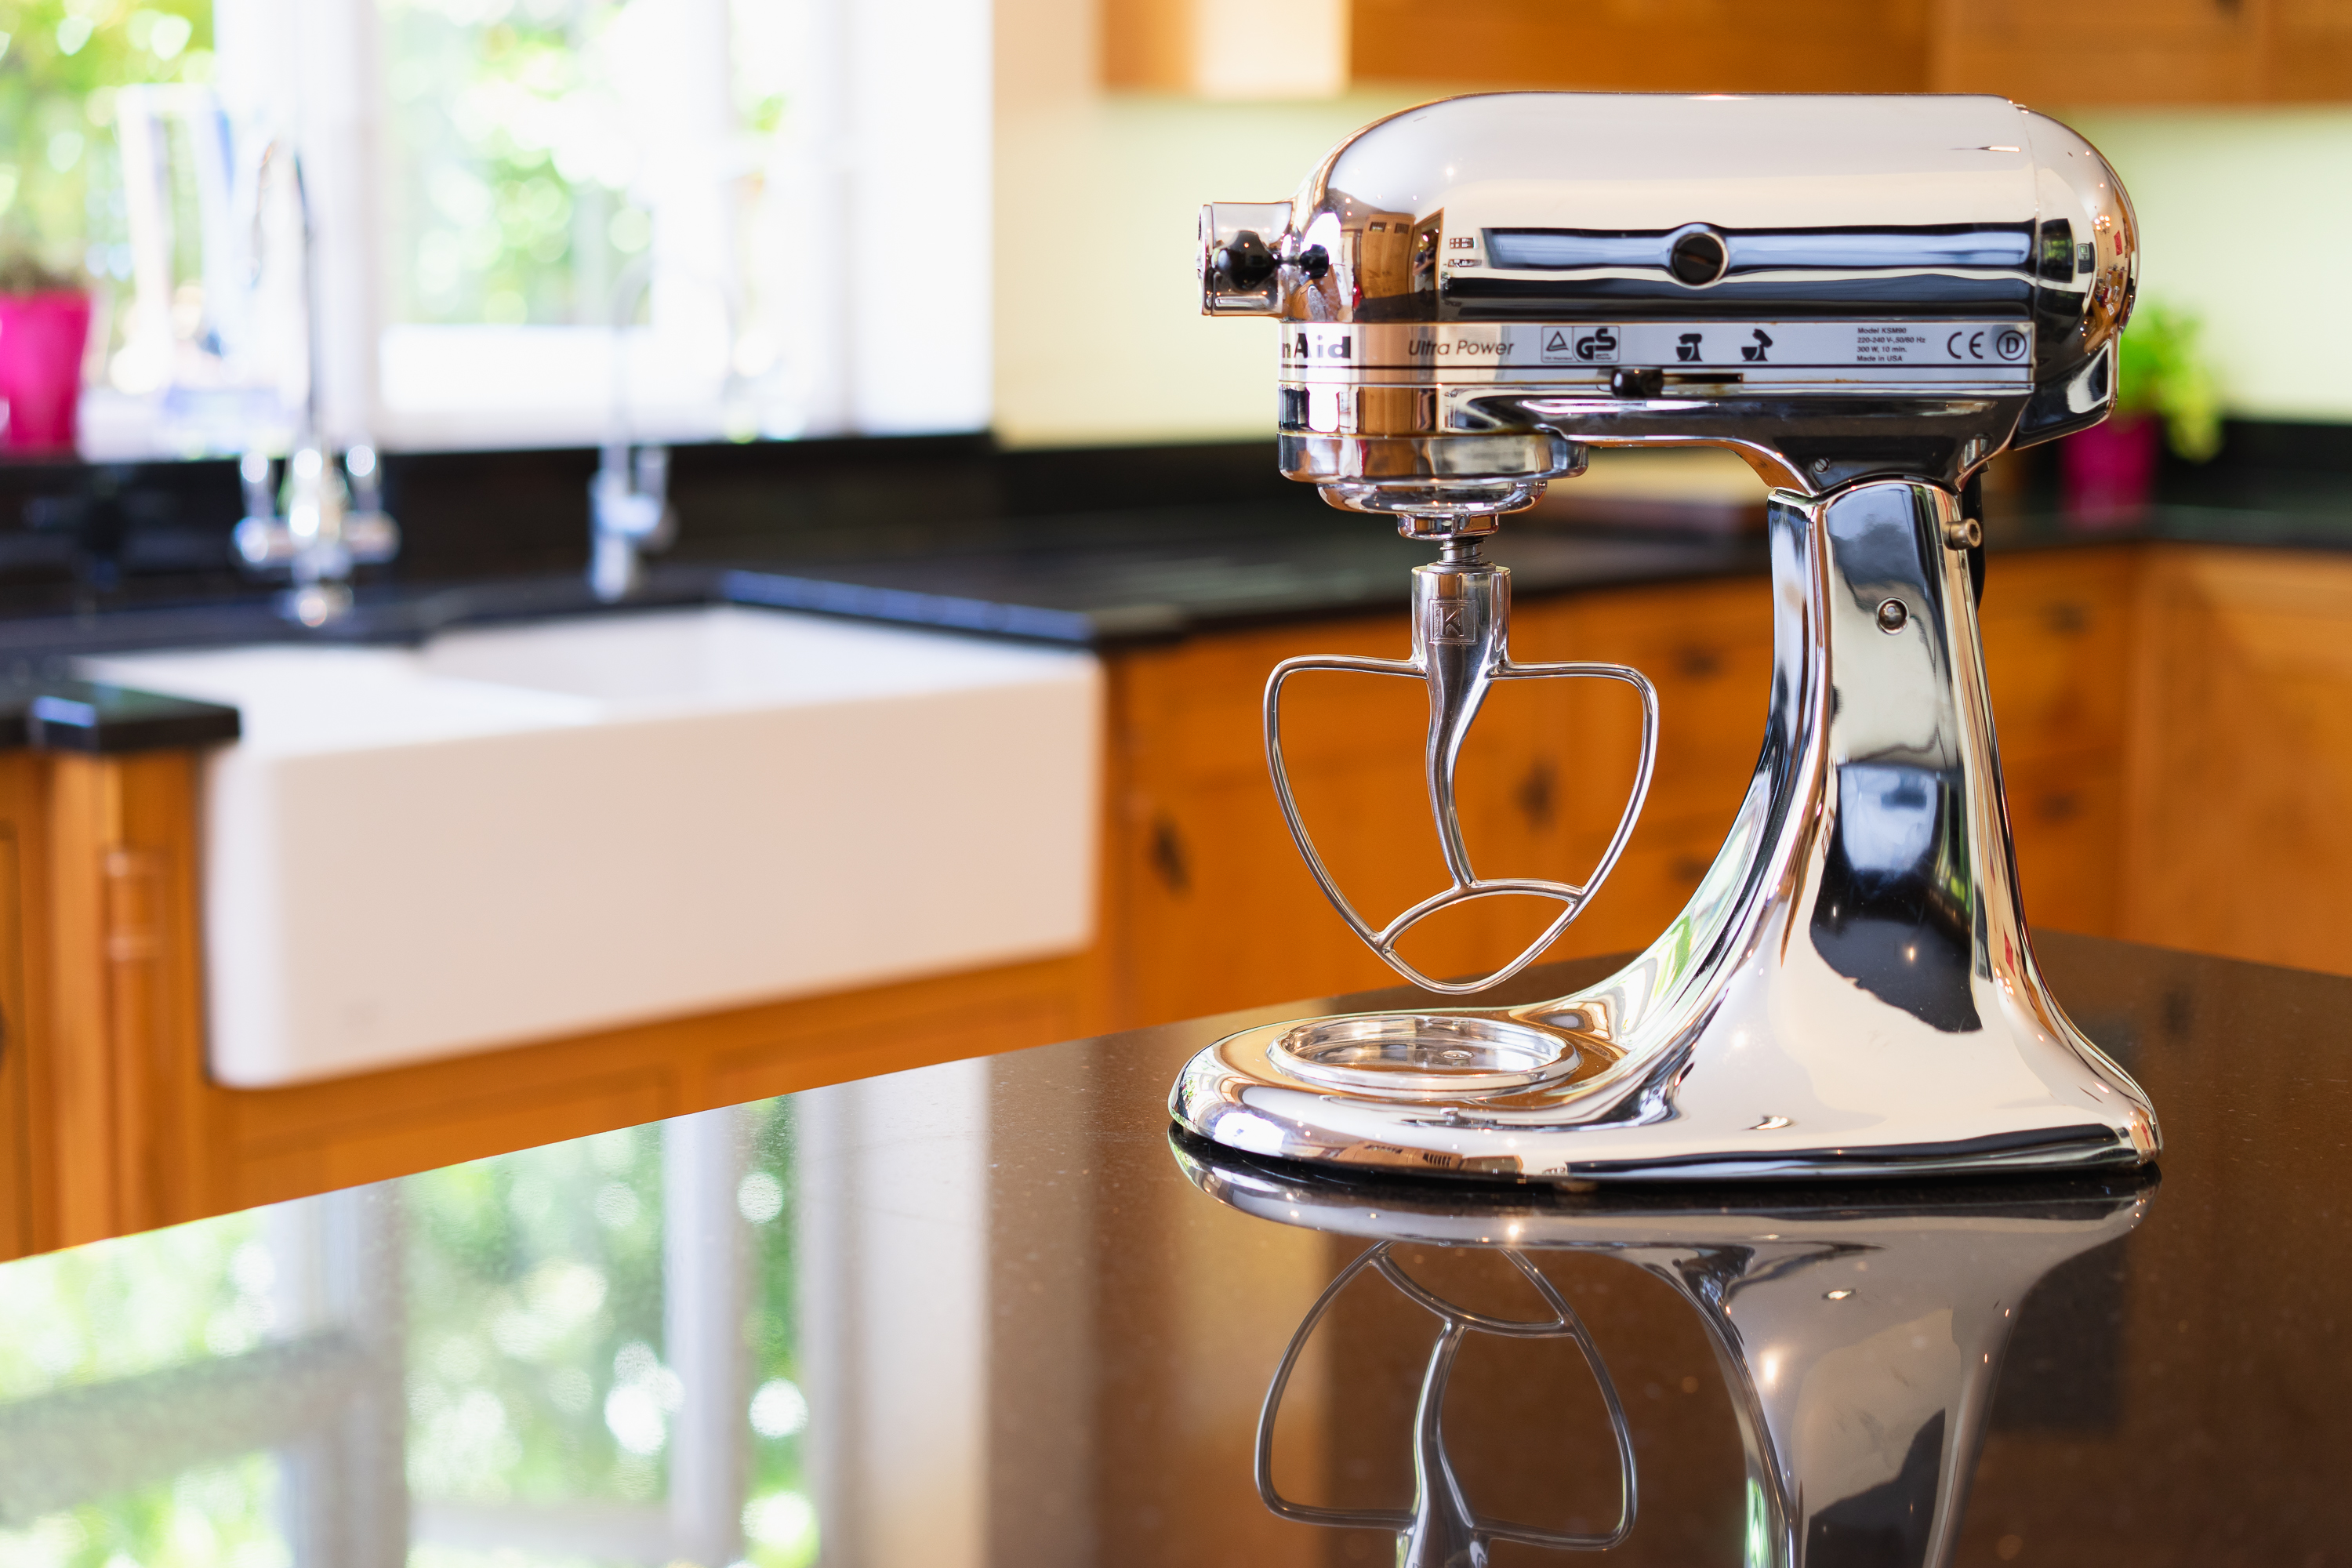 Happy Accident Launches Company That Sells Kitchenaid Parts And Now